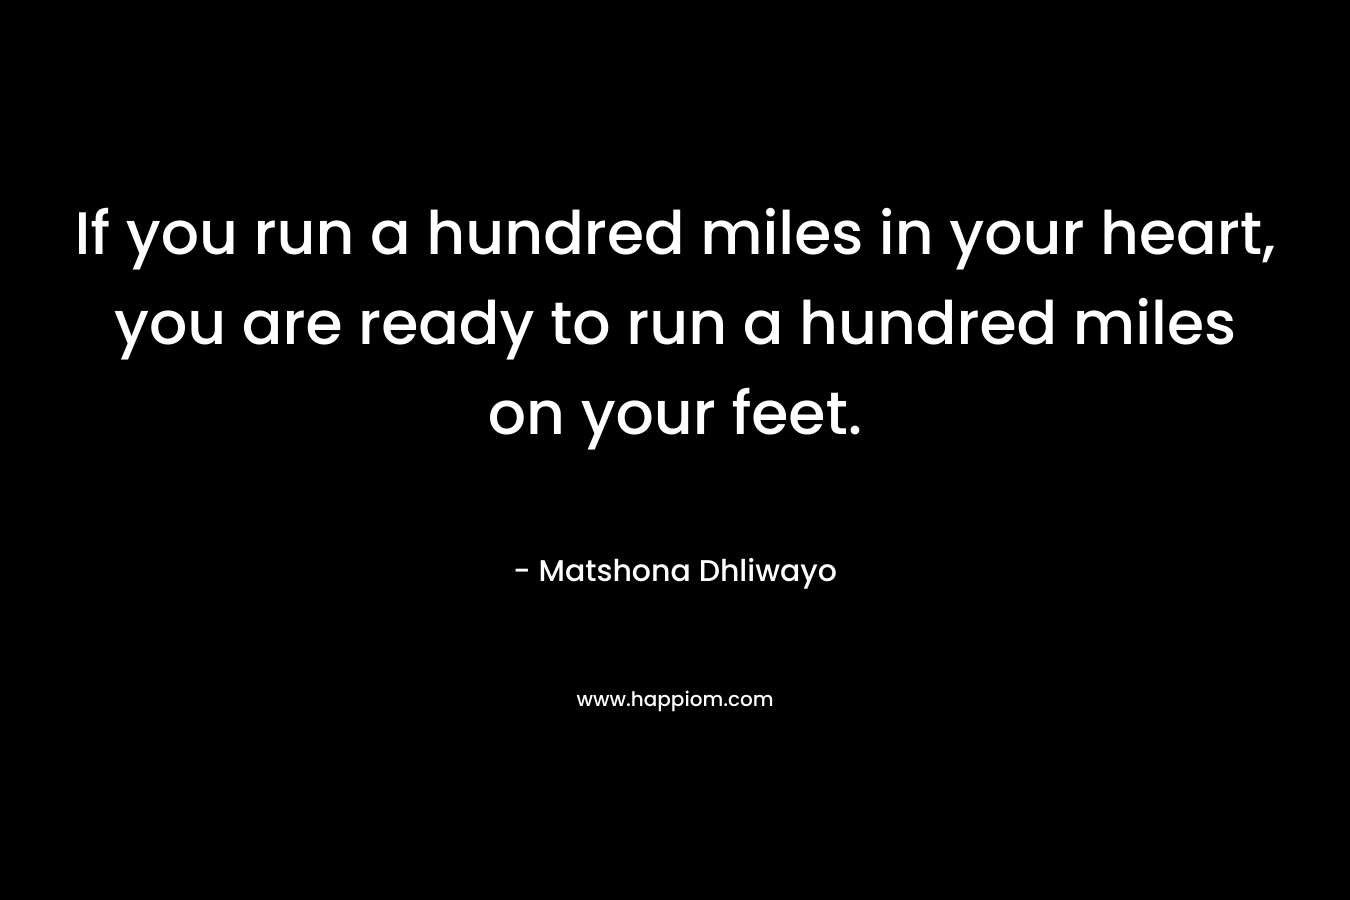 If you run a hundred miles in your heart, you are ready to run a hundred miles on your feet.